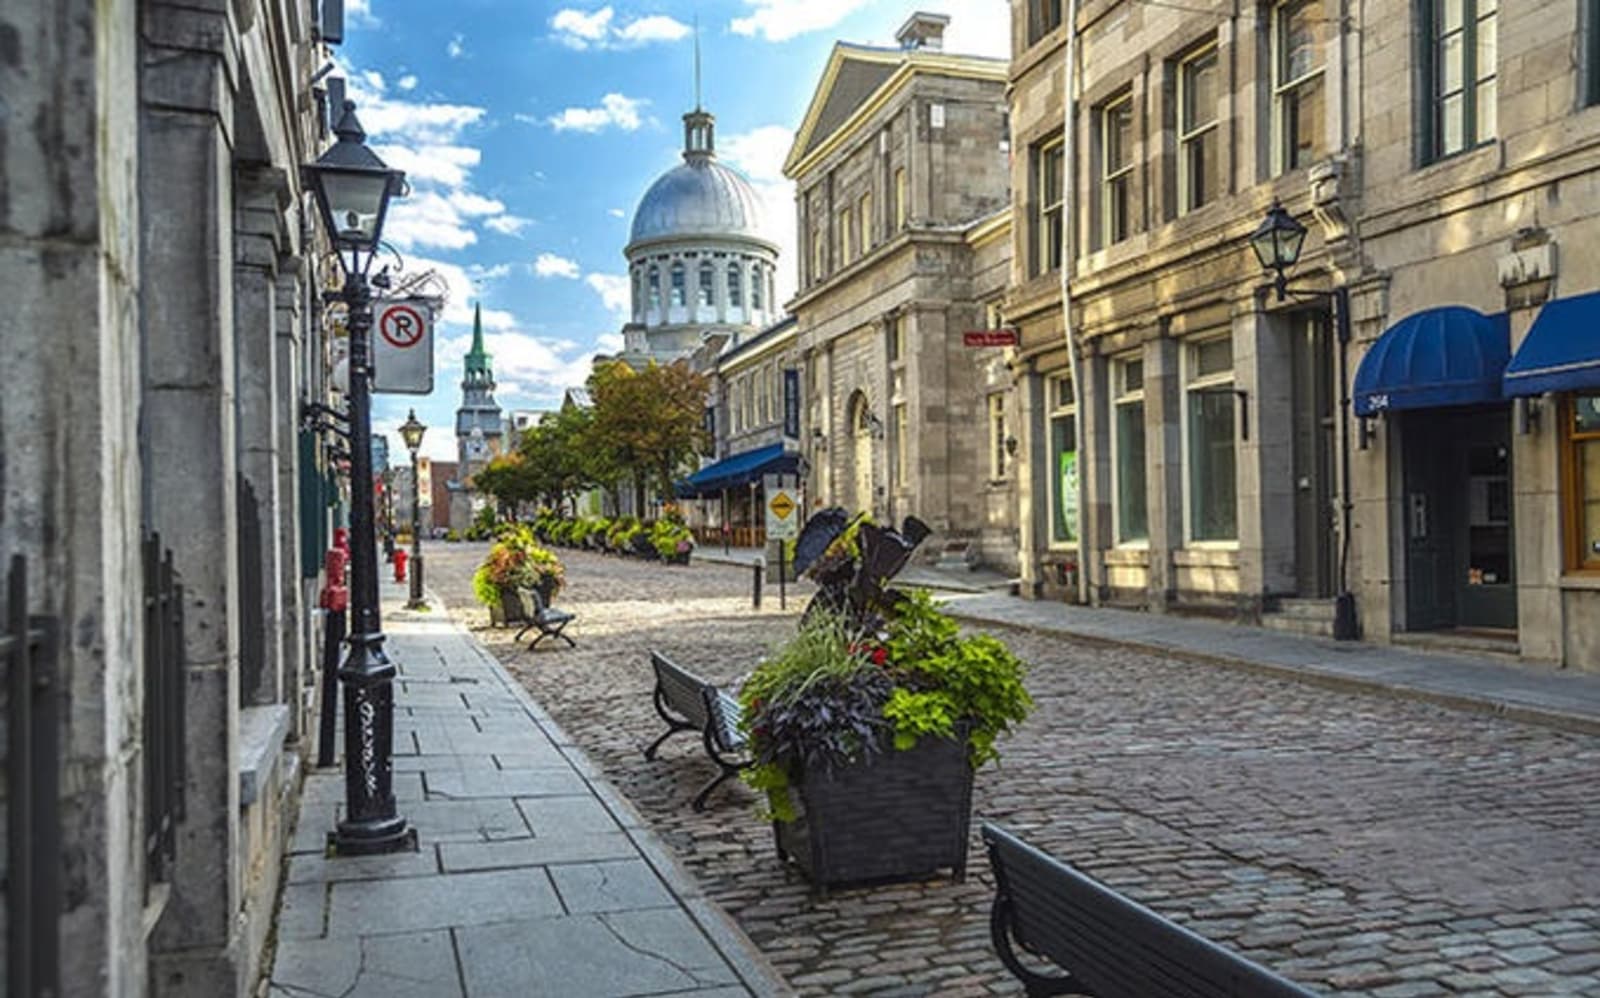 rs-montreal-canada-shutterstock_390831940.jpg